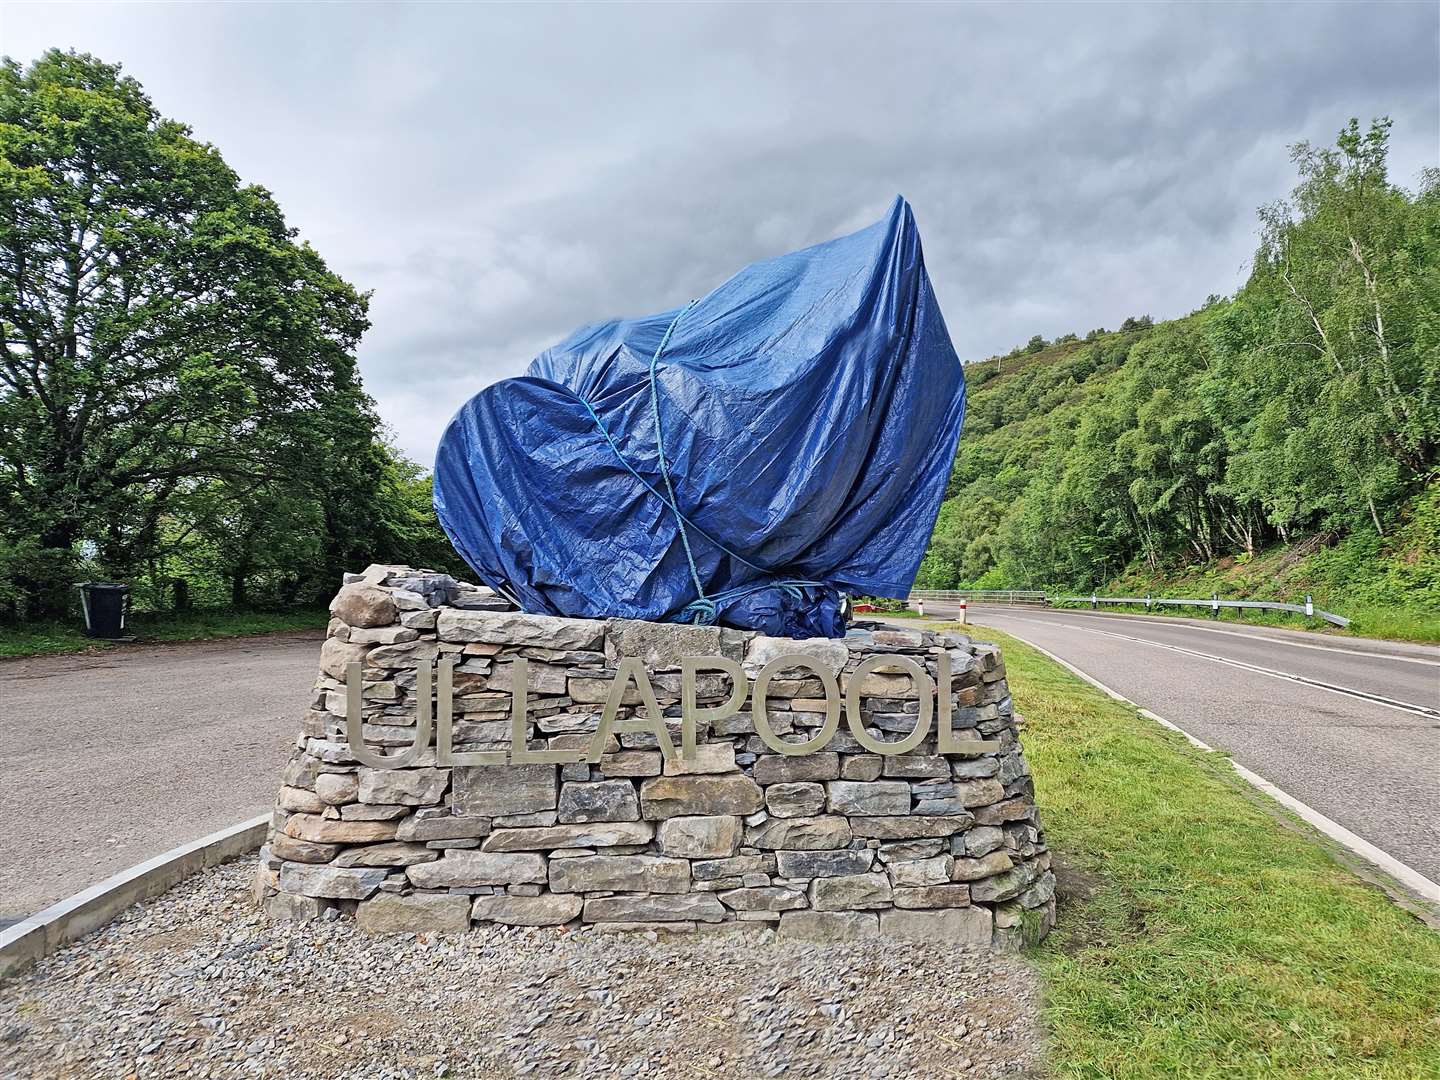 Ullapool's entrance sign big reveal is set for Saturday.